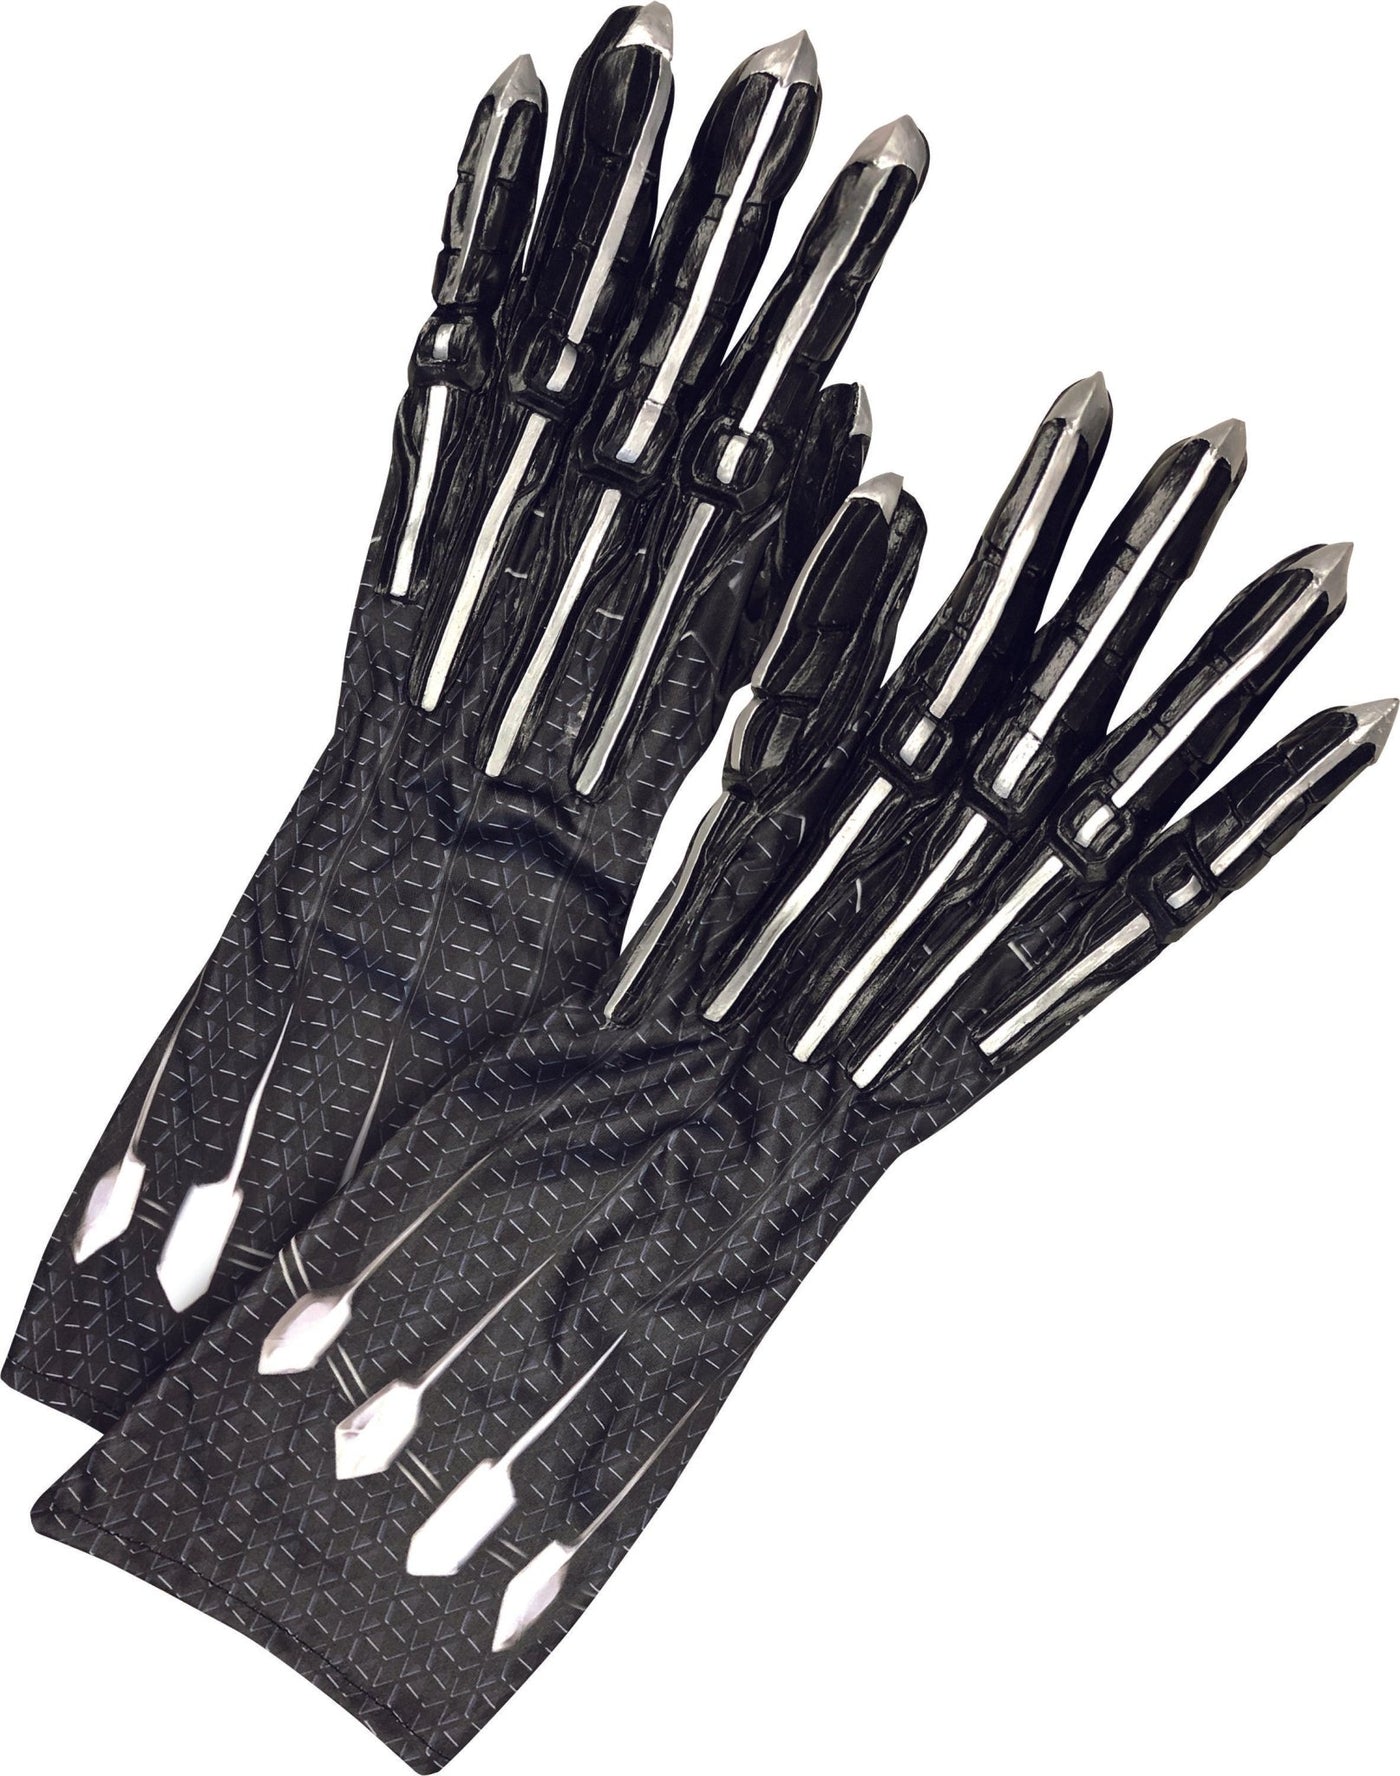 Rubies Ad Black Panther Gloves - RUB-200439 - JJ's Party House